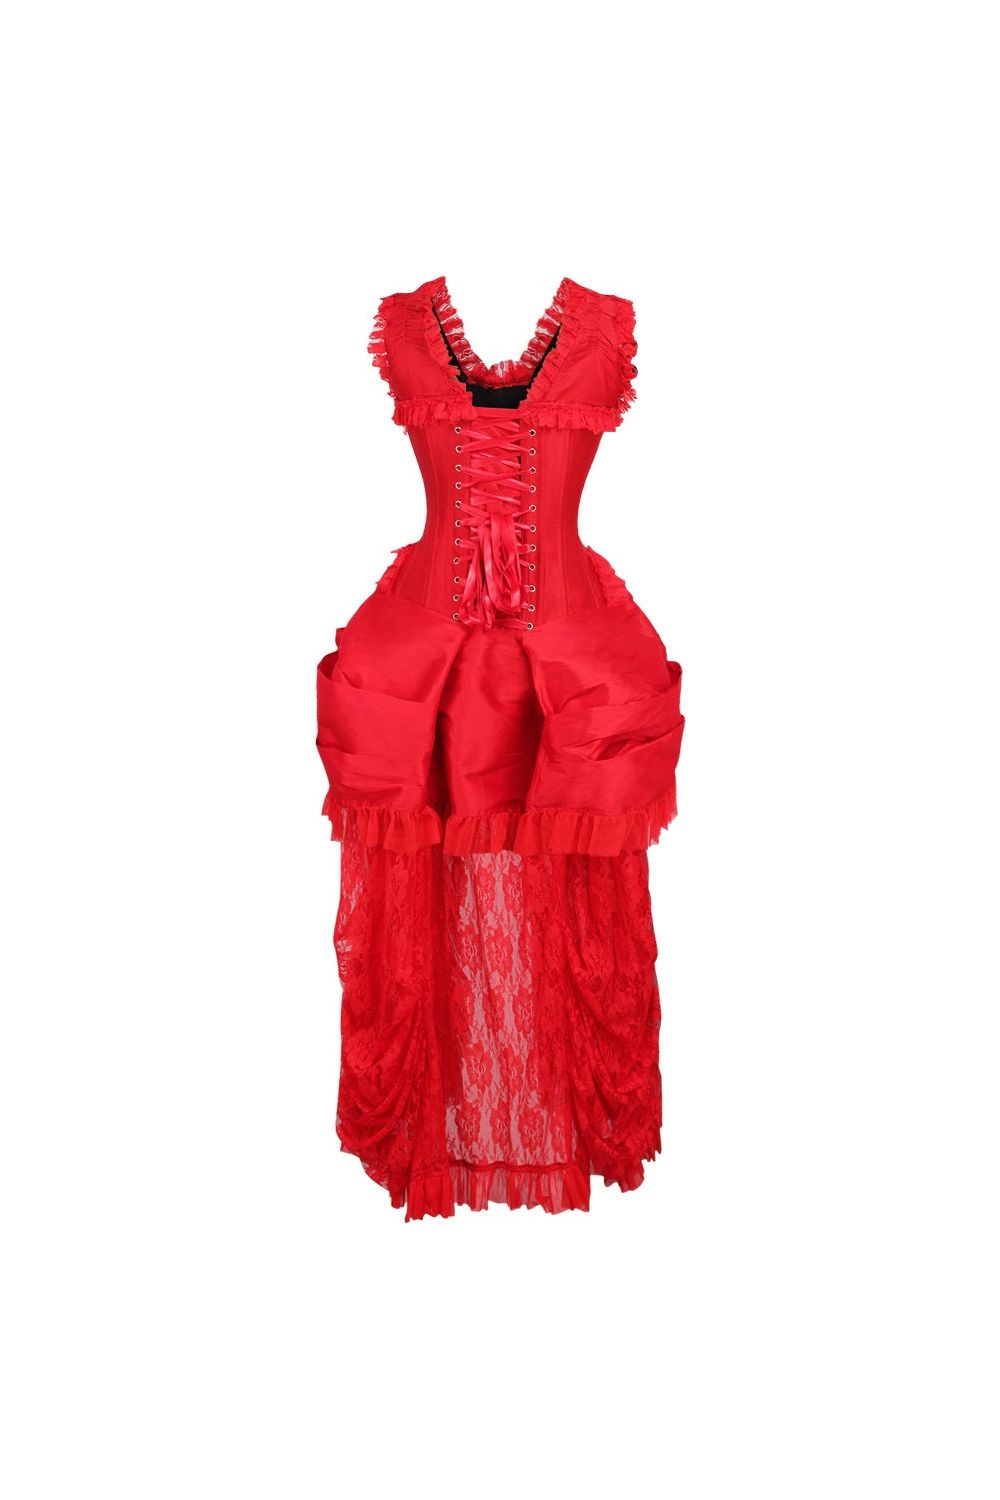 Top Drawer Steel Boned Red Lace Victorian Bustle Corset Dress